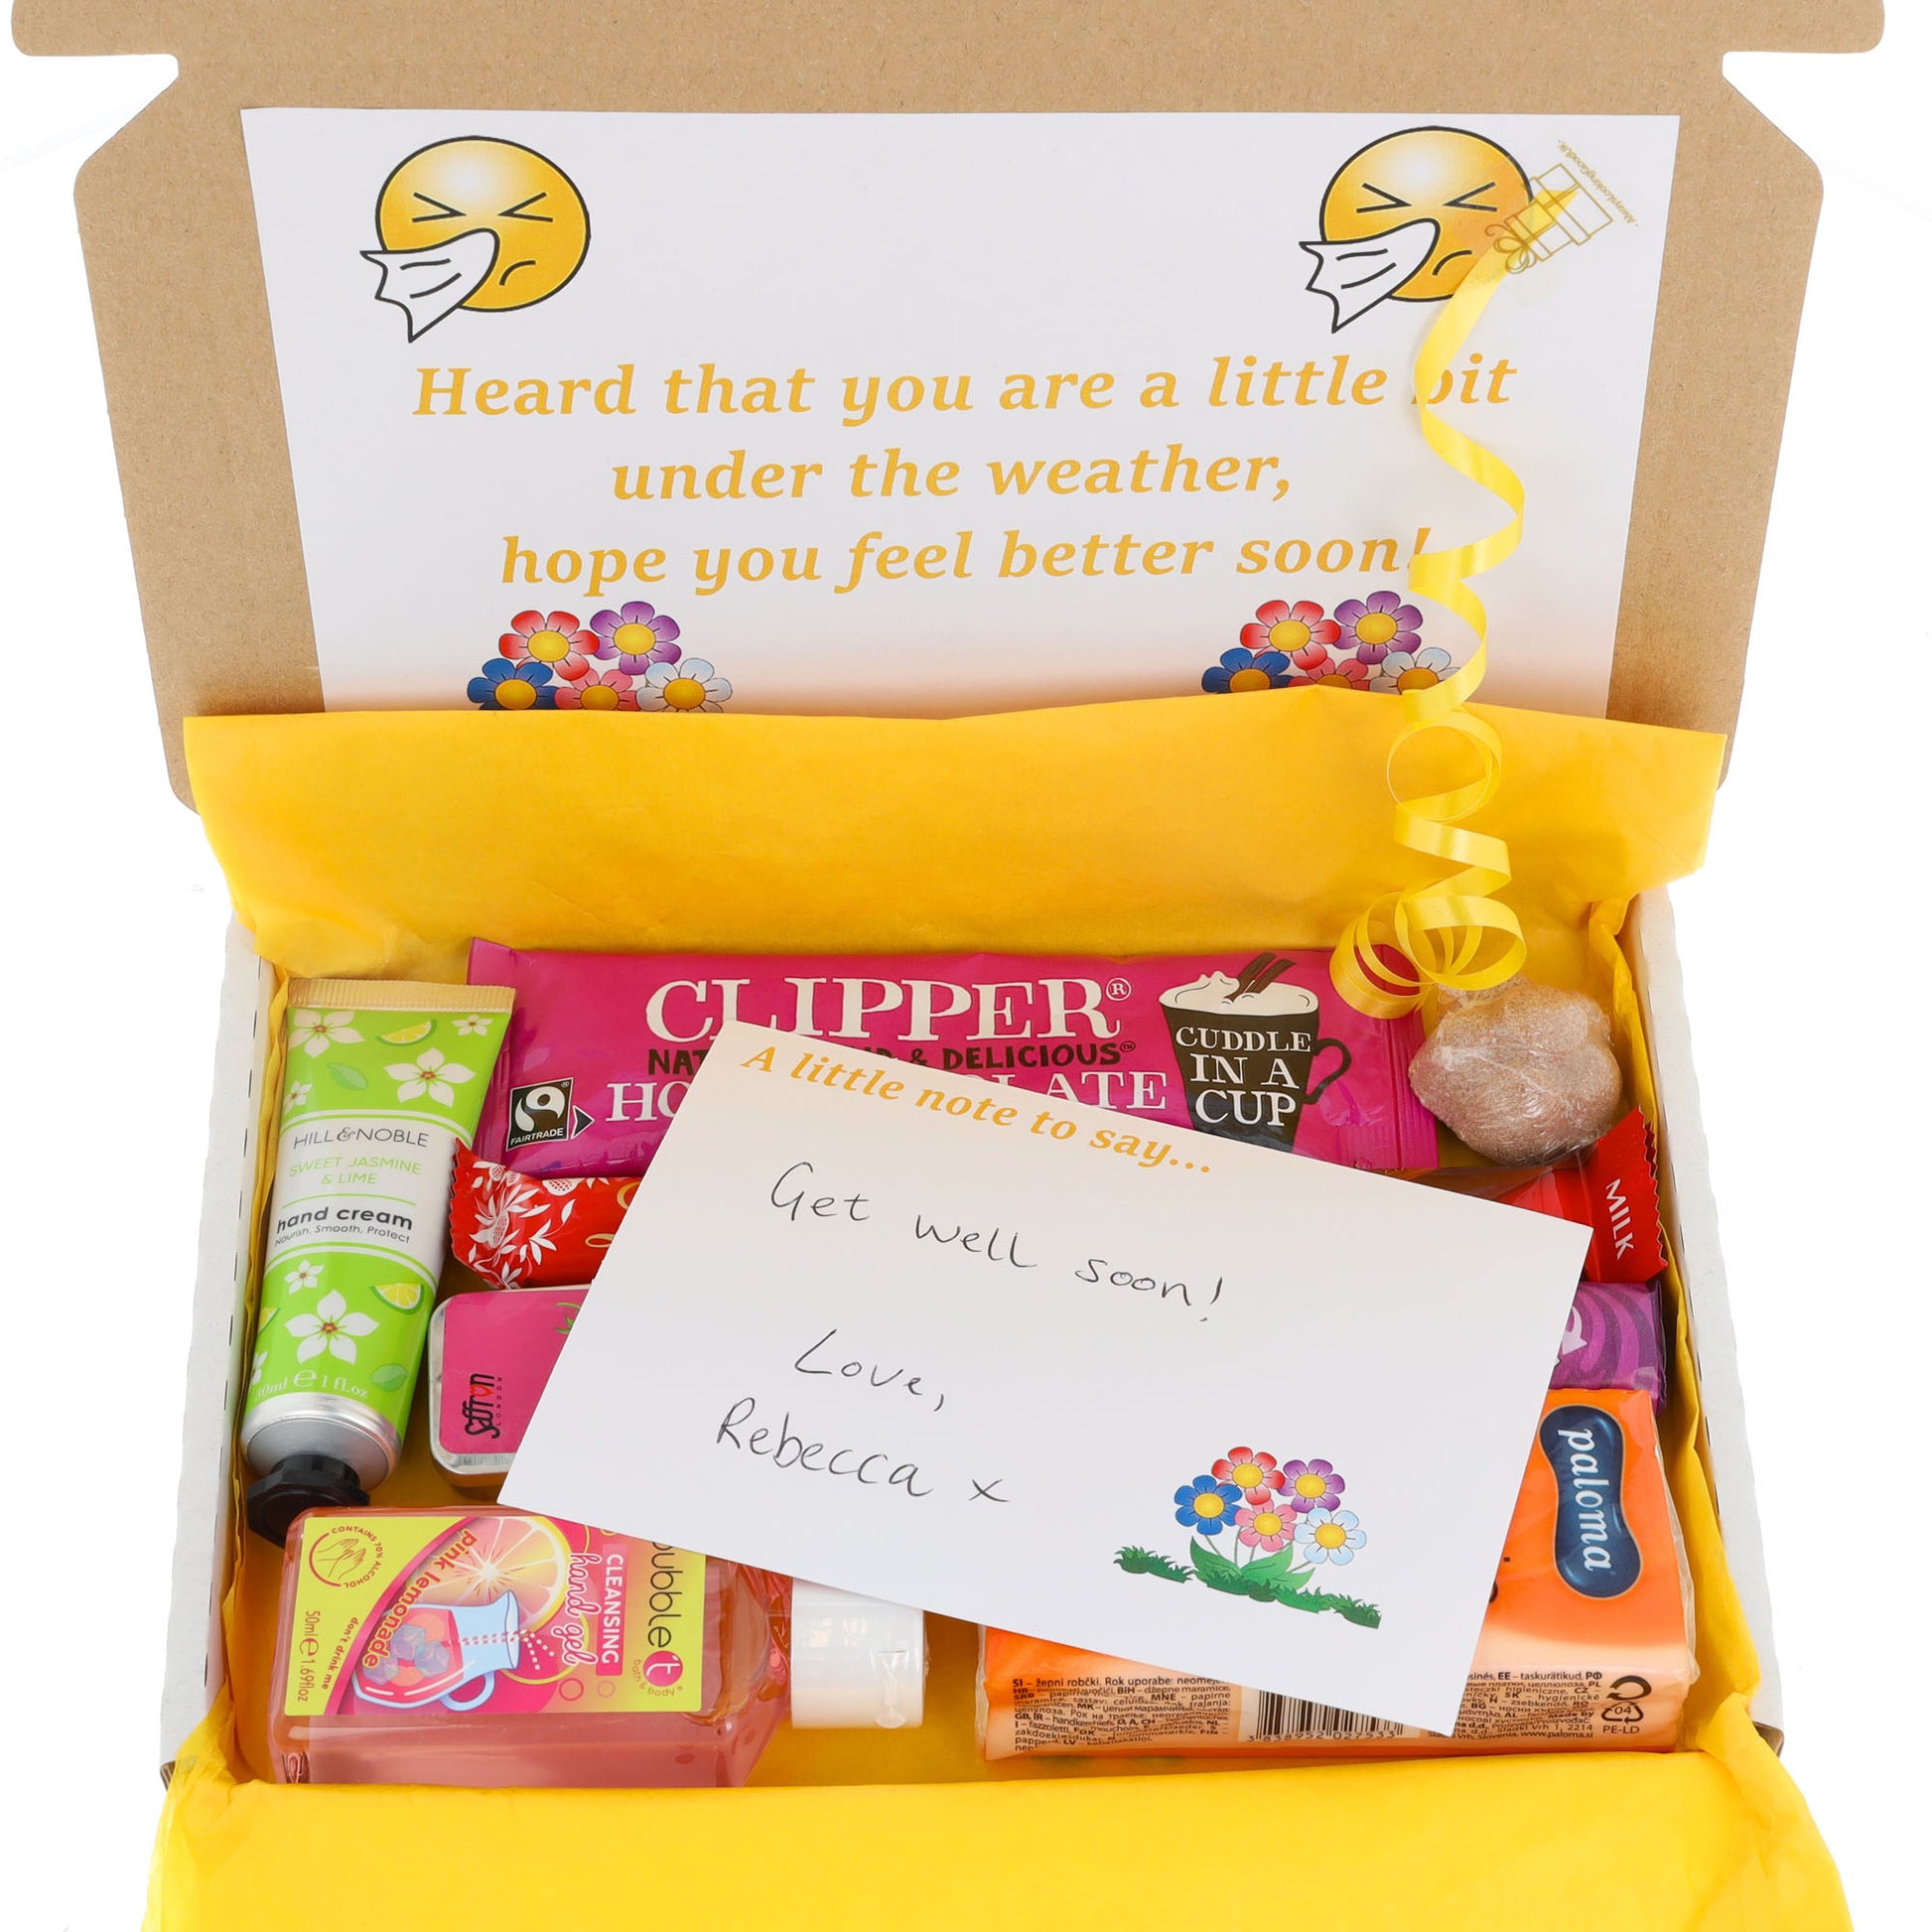 Get Well Soon Care Package Hug in a Box Letterbox Gift Set  - Always Looking Good -   